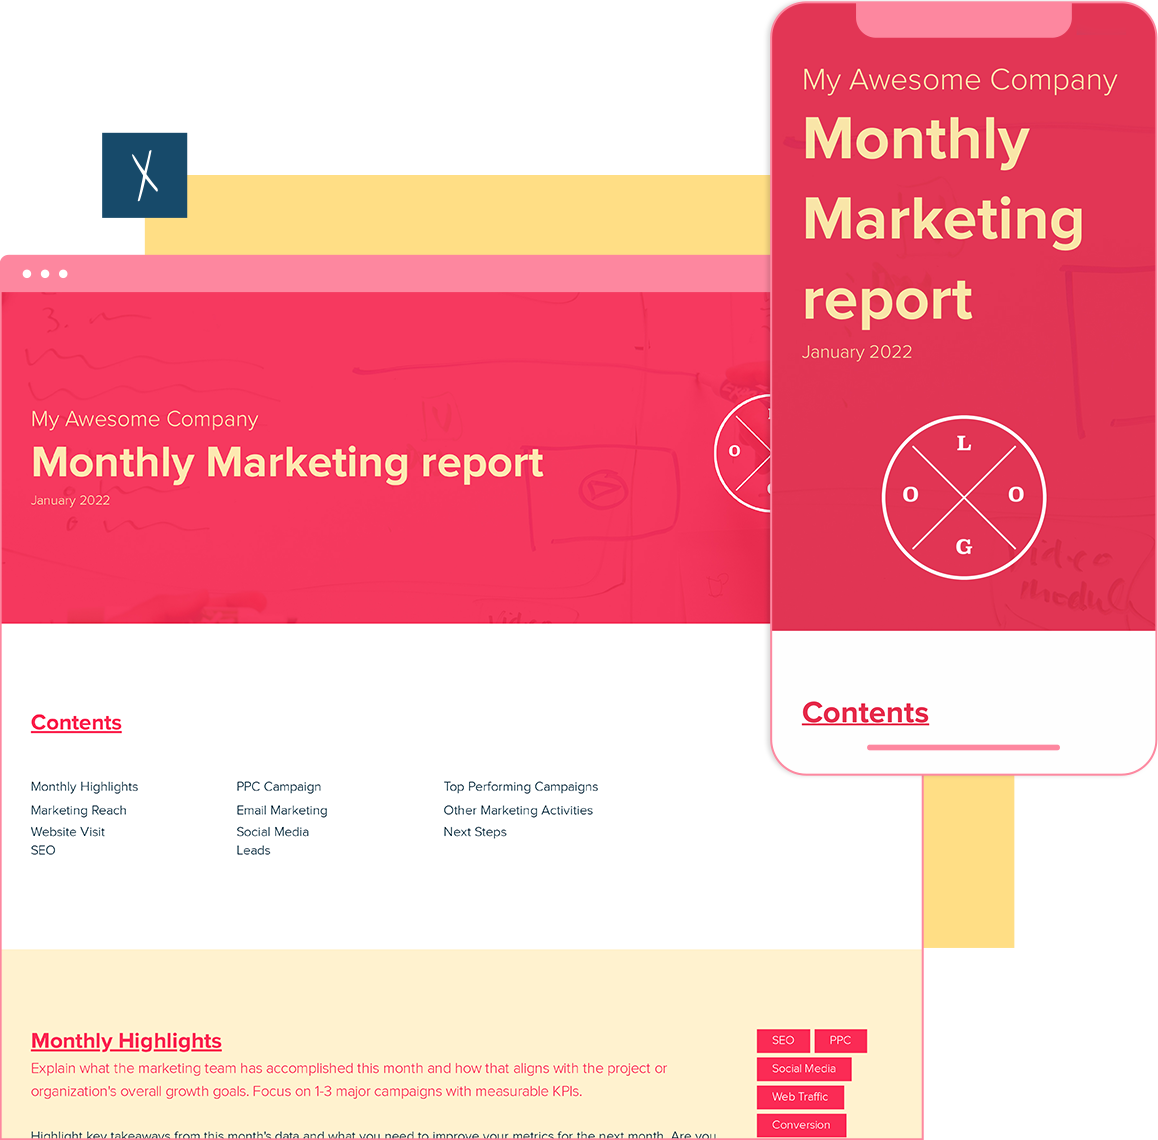 Monthly Marketing Report Template  | Desktop and Mobile Views